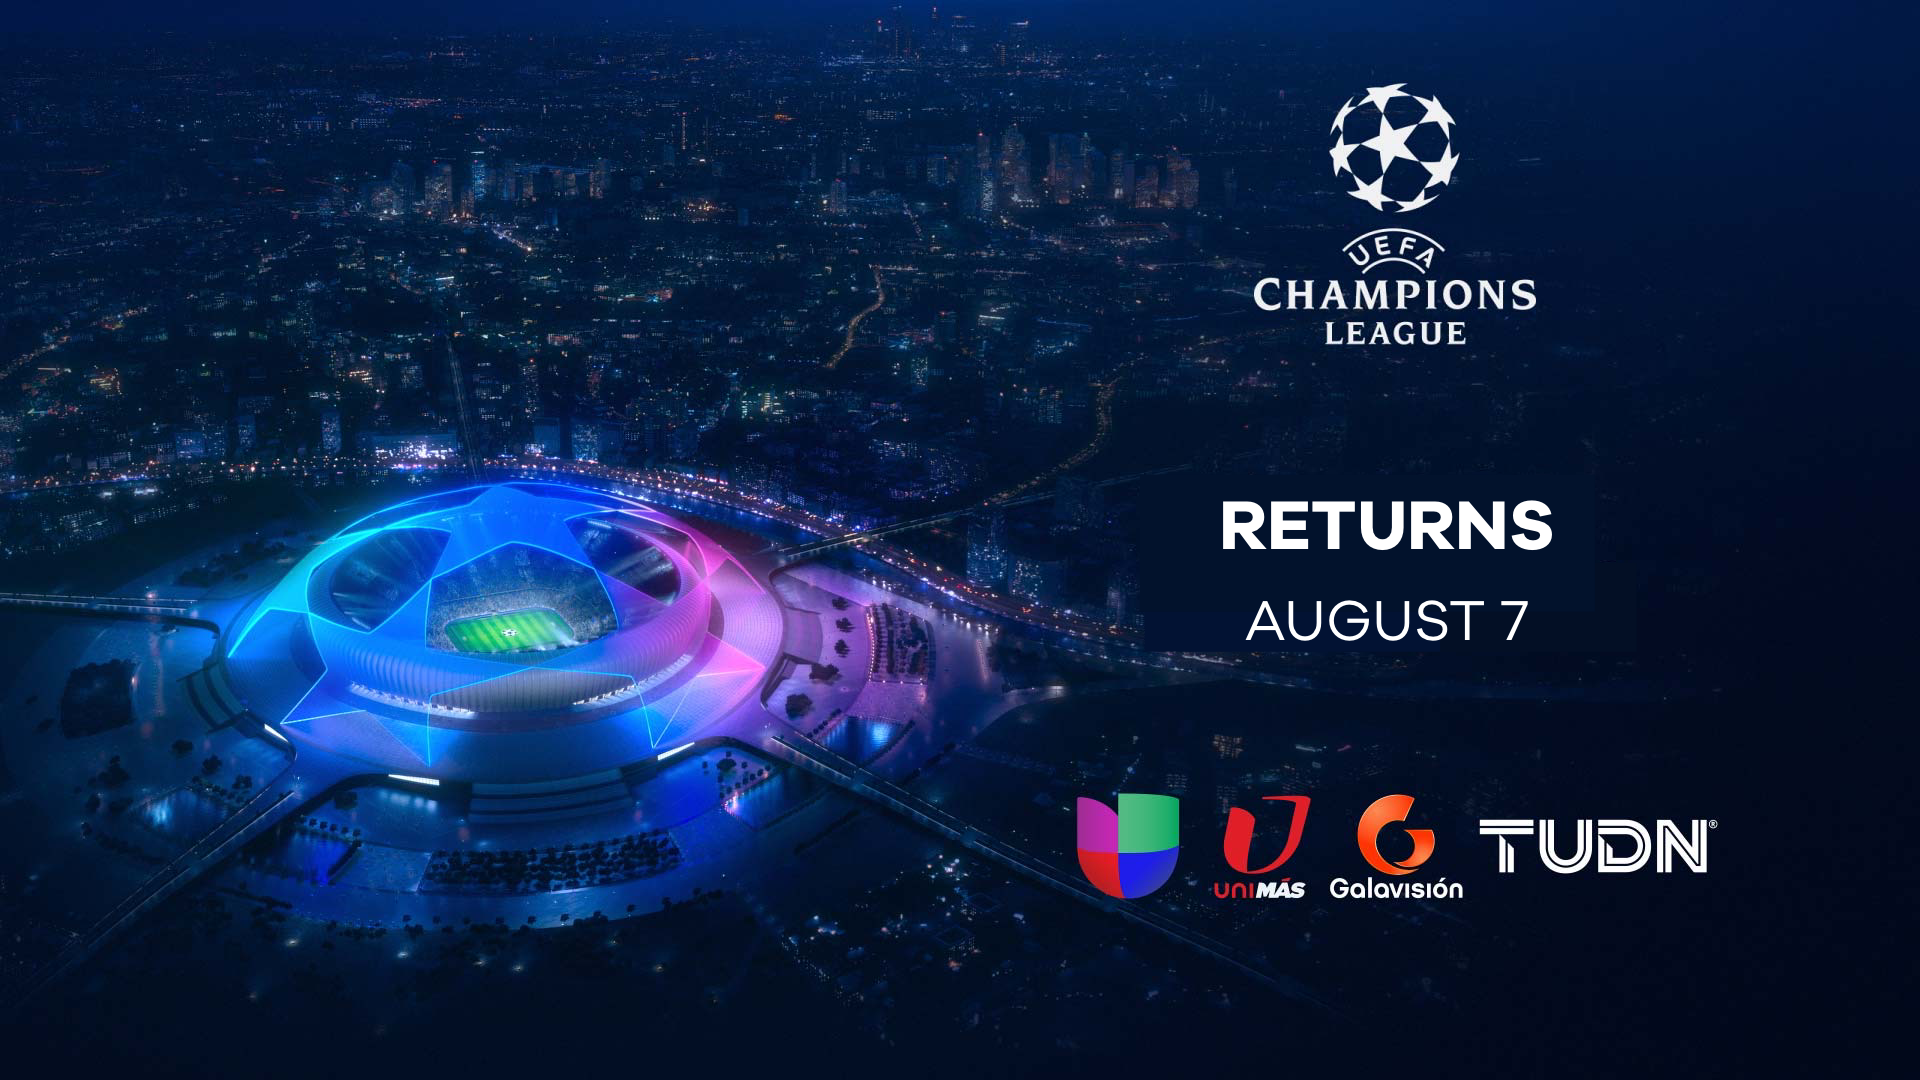 Univisions TUDN To Air Resumption of 2019-20 UEFA Champions League on Broadcast, Cable TV